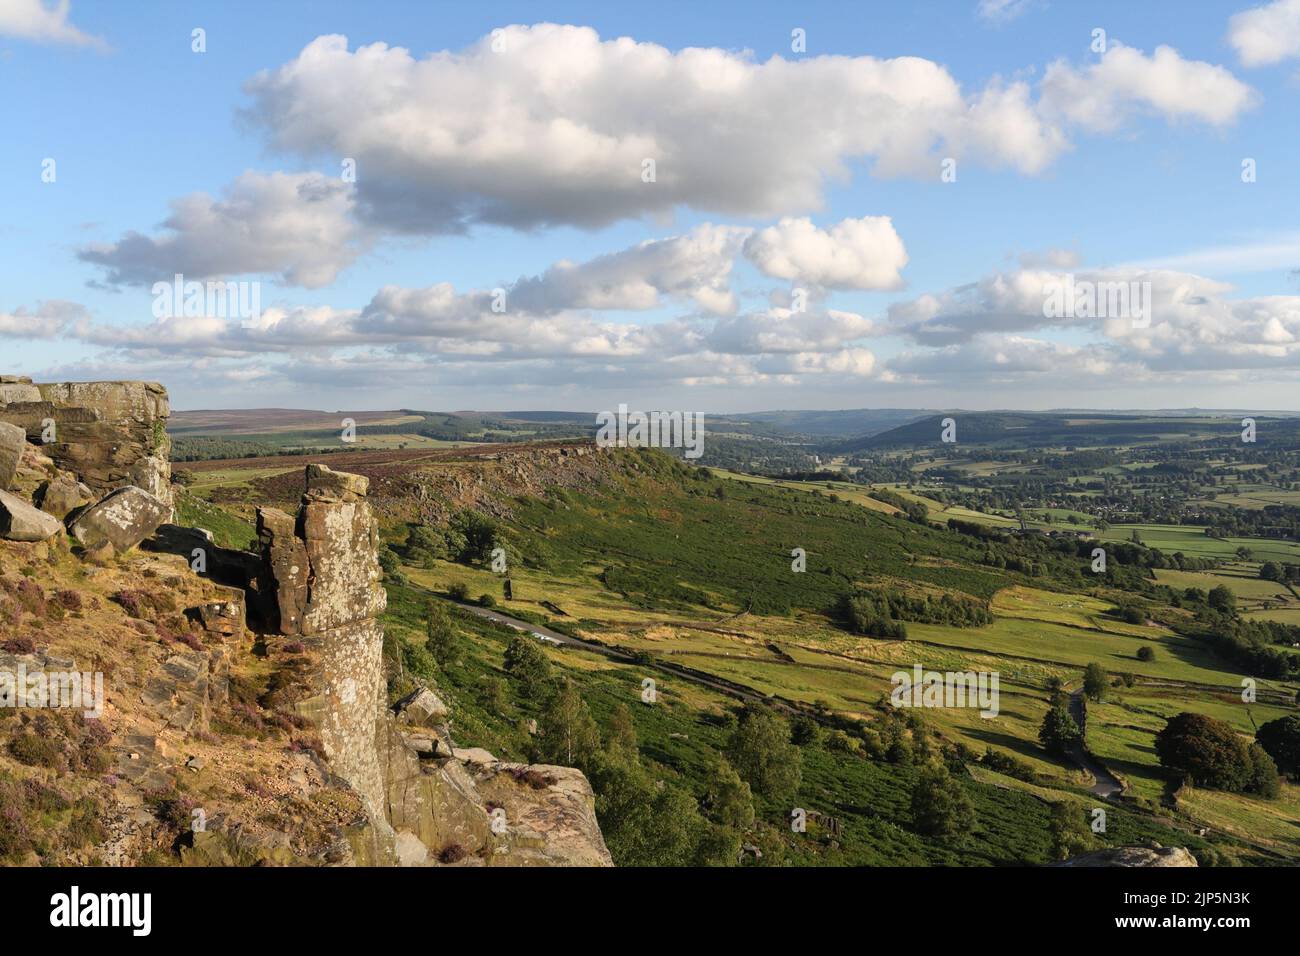 Curbar edge looking over Baslow Edge in the Peak District, Derbyshire landscape England. Scenic view Stock Photo